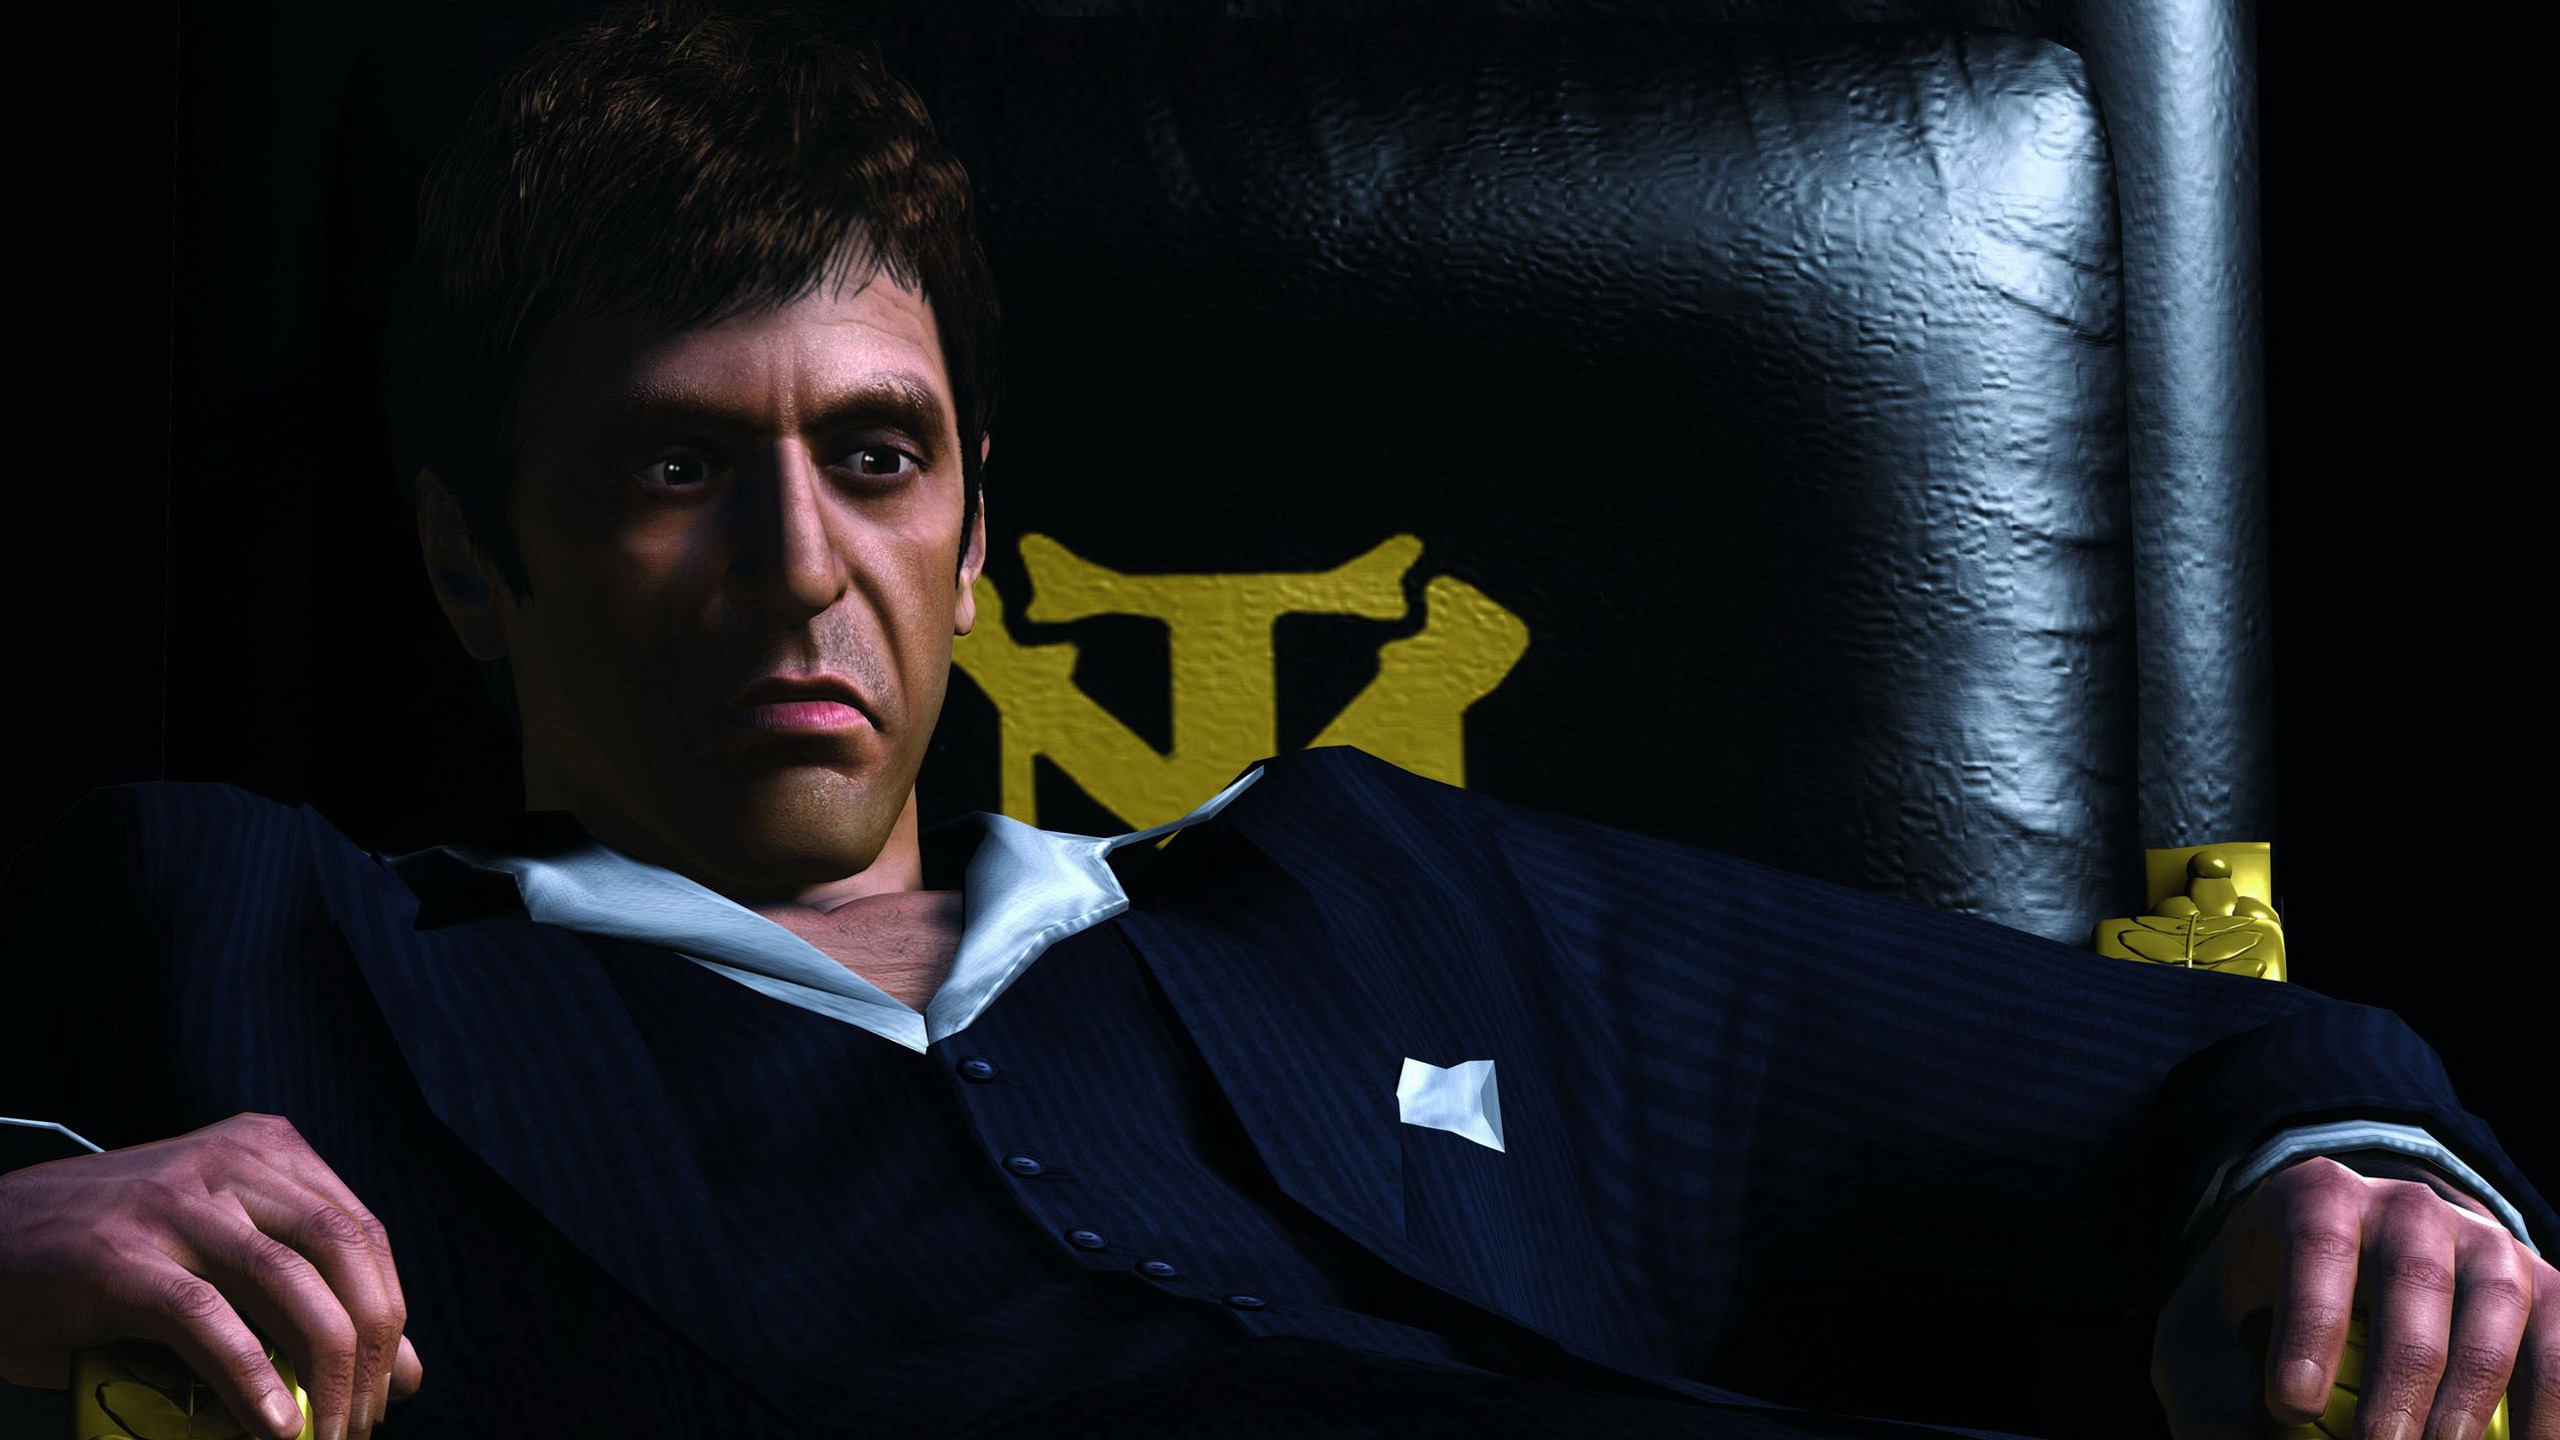 Scarface Game for 2560x1440 HDTV resolution